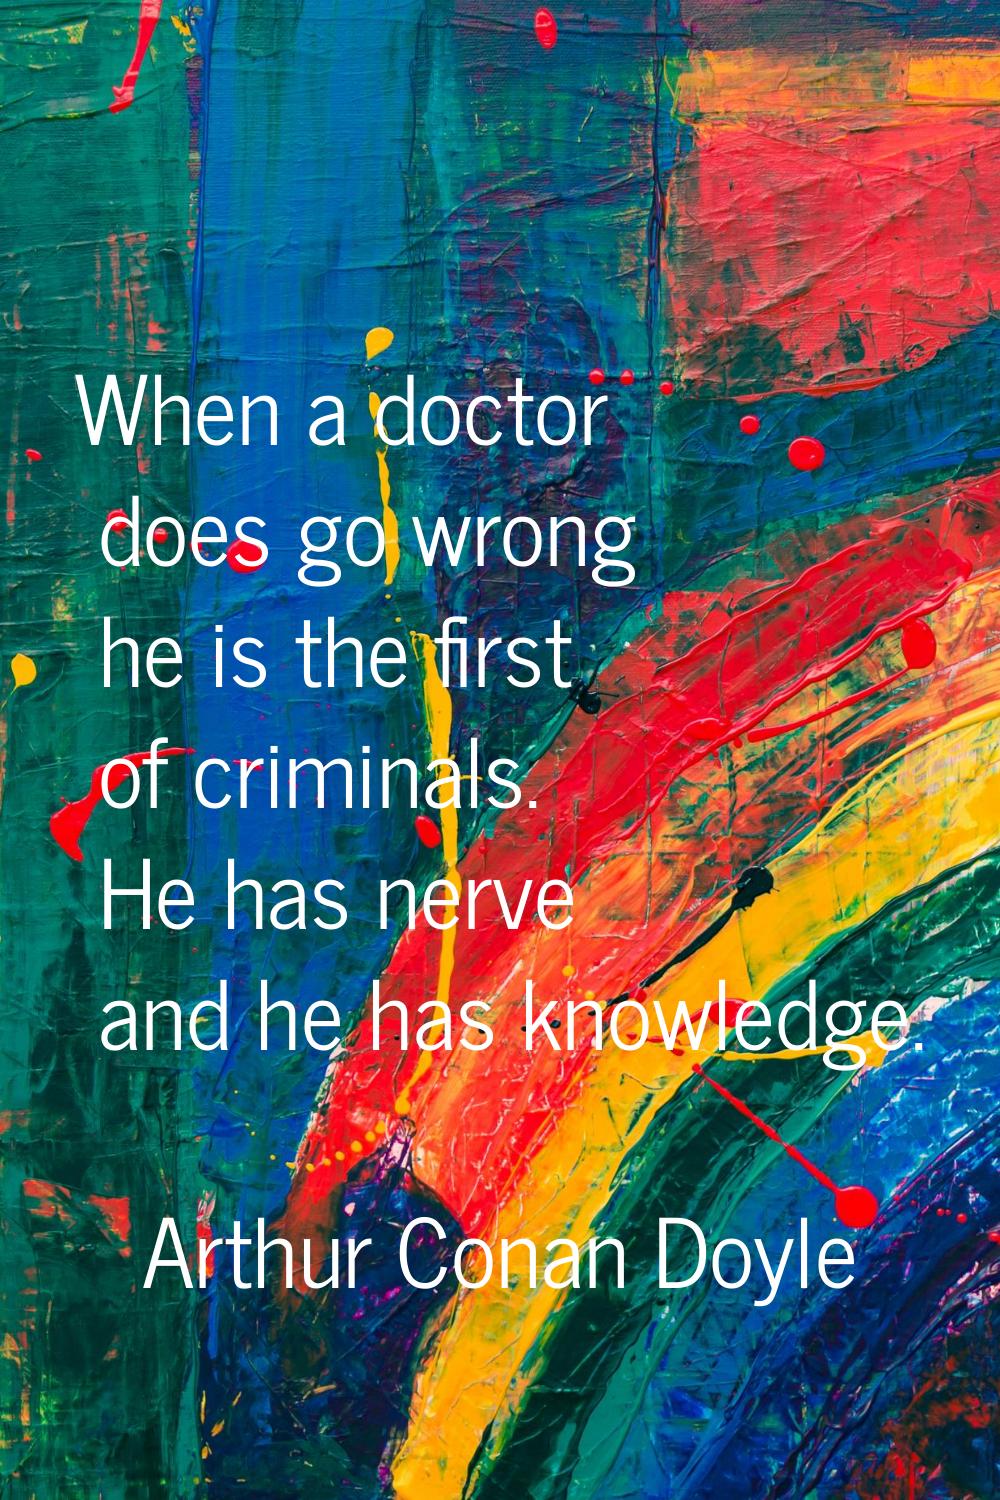 When a doctor does go wrong he is the first of criminals. He has nerve and he has knowledge.